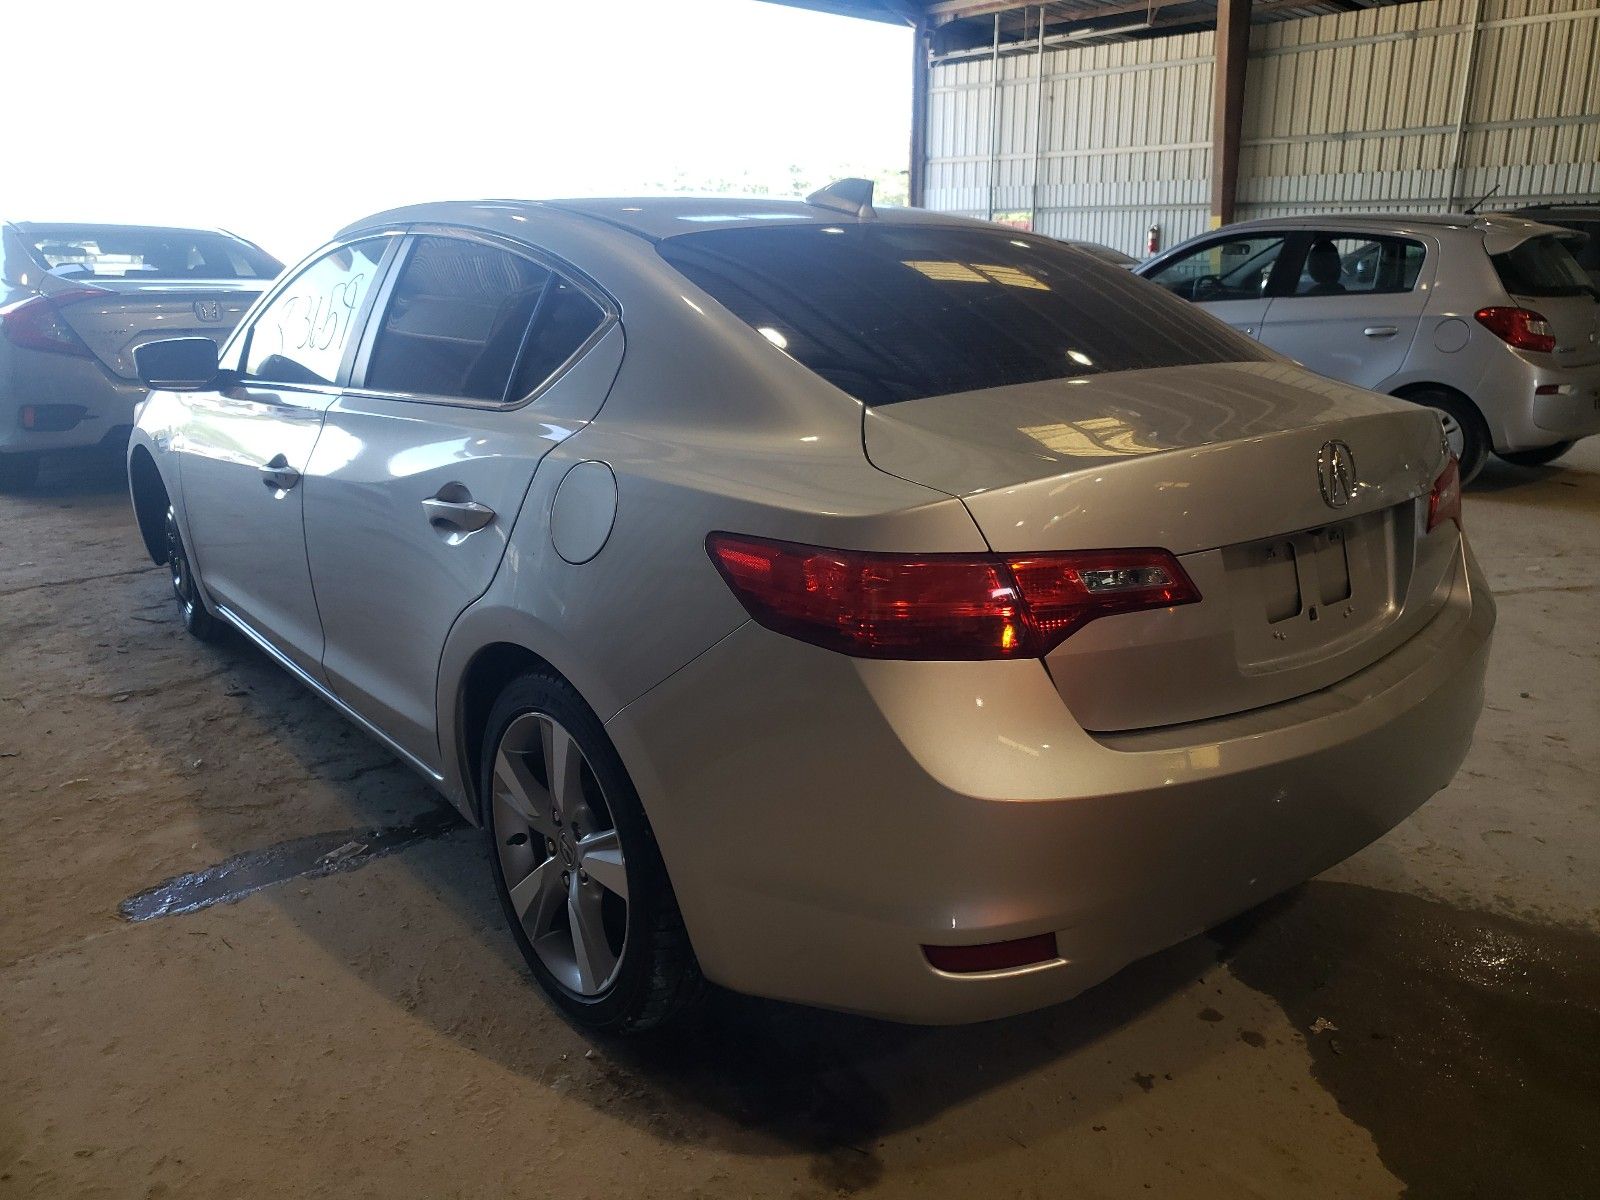 3 of 19VDE1F37EE011918 Acura 2014